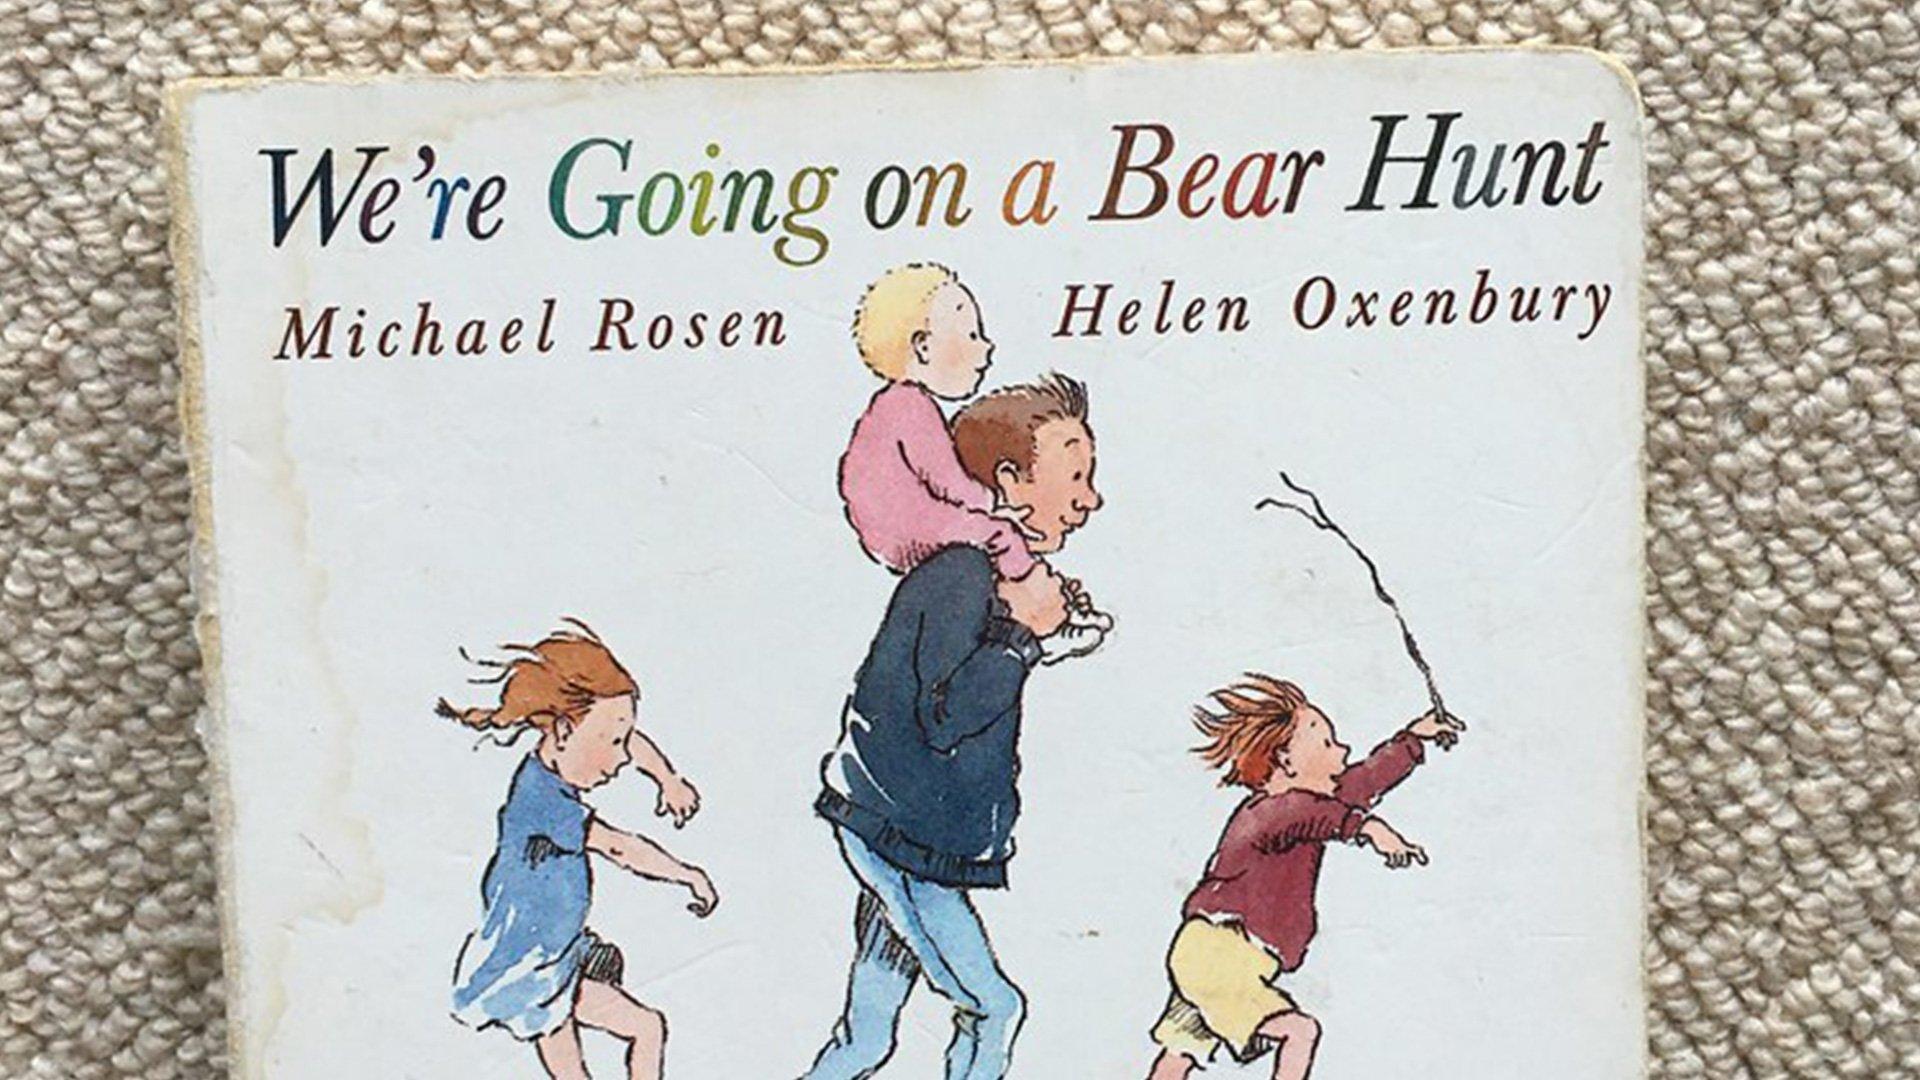 7 Nostalgic Books You Grew Up With And One To Read Now